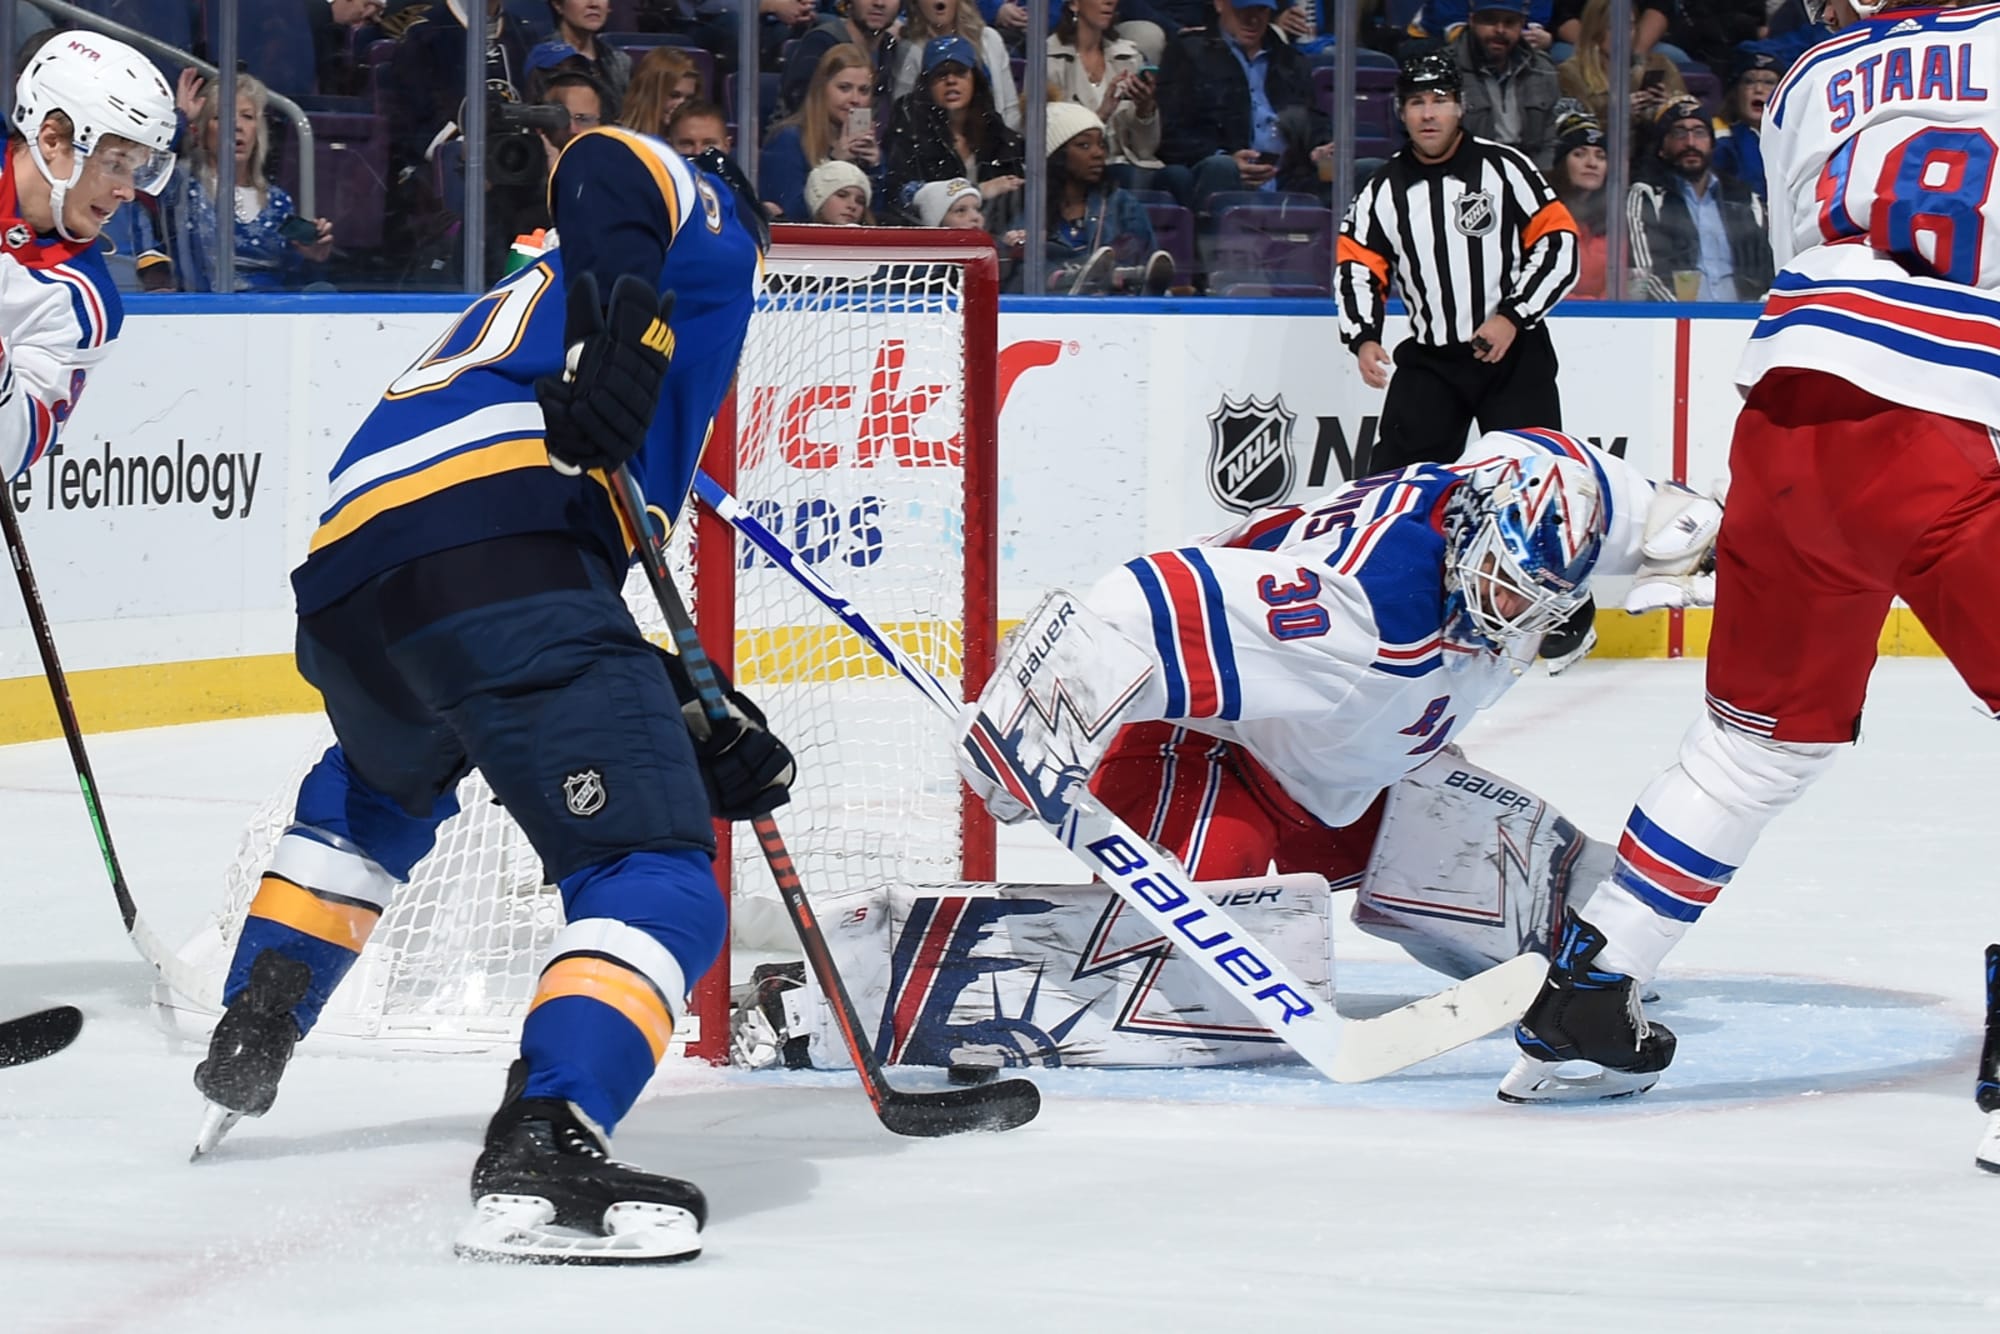 New York Rangers vs St. Louis Blues: Outclassed by the champions 5-2